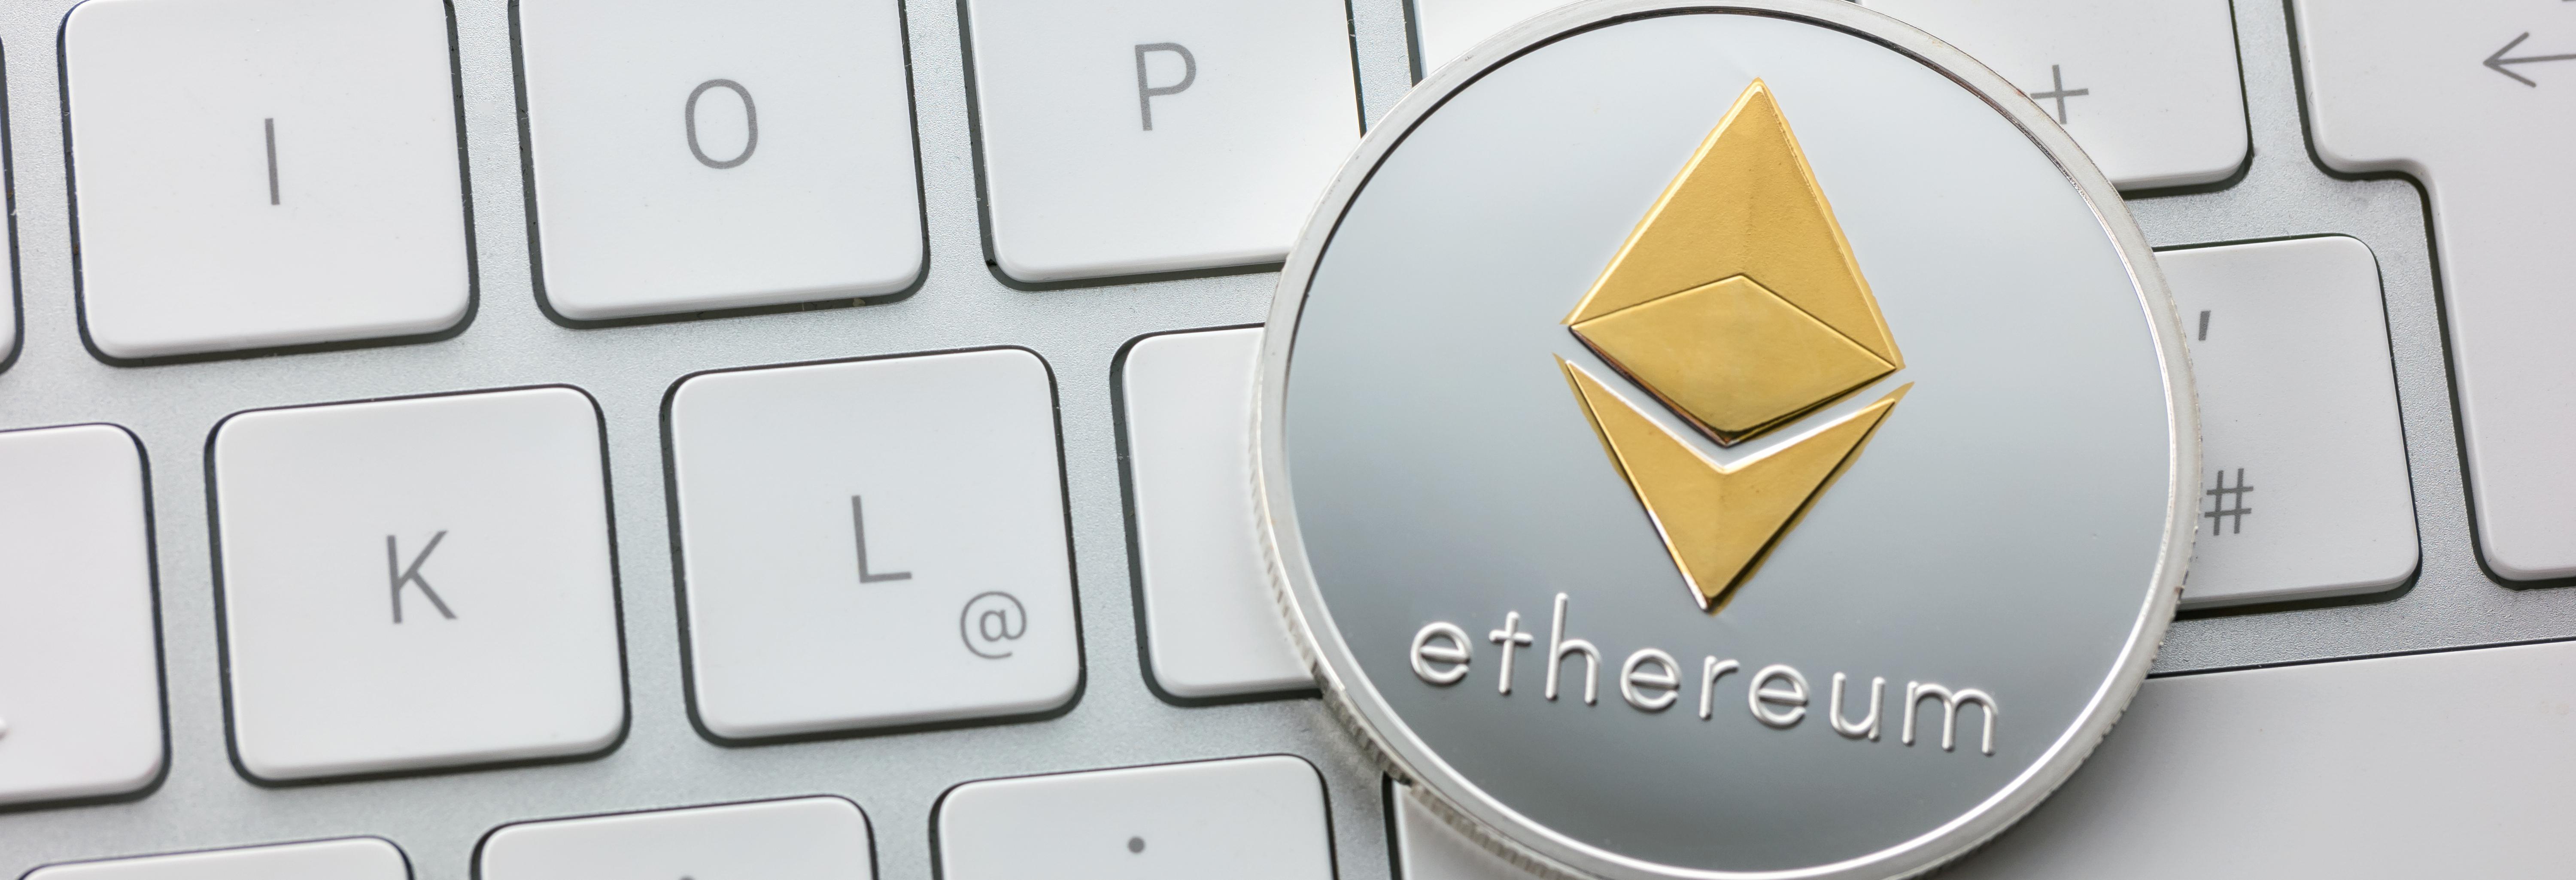 Ethereum Explained for Beginners - Ethereum (ETH) Guide ...